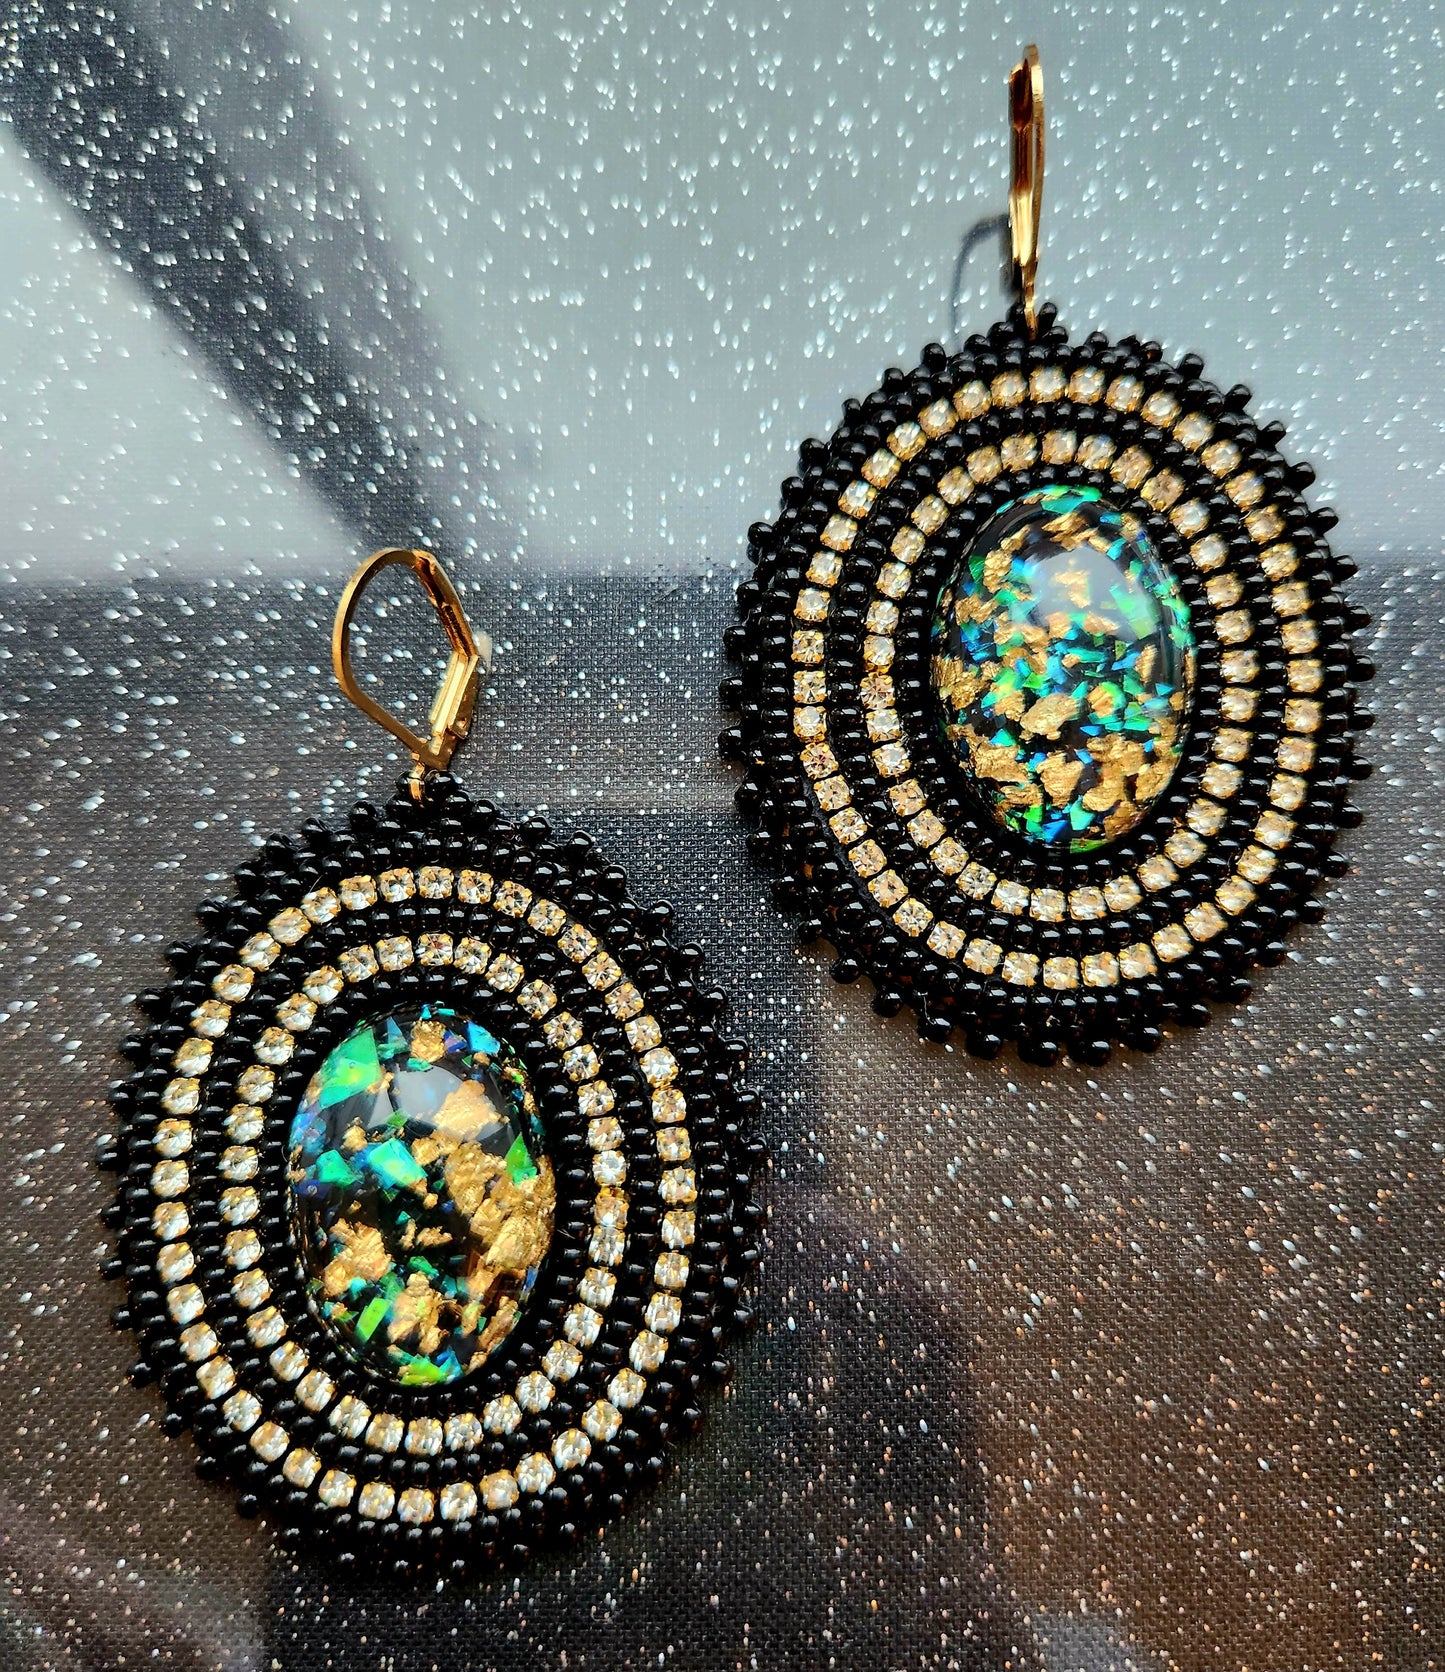 Black and Gold Beaded Earrings